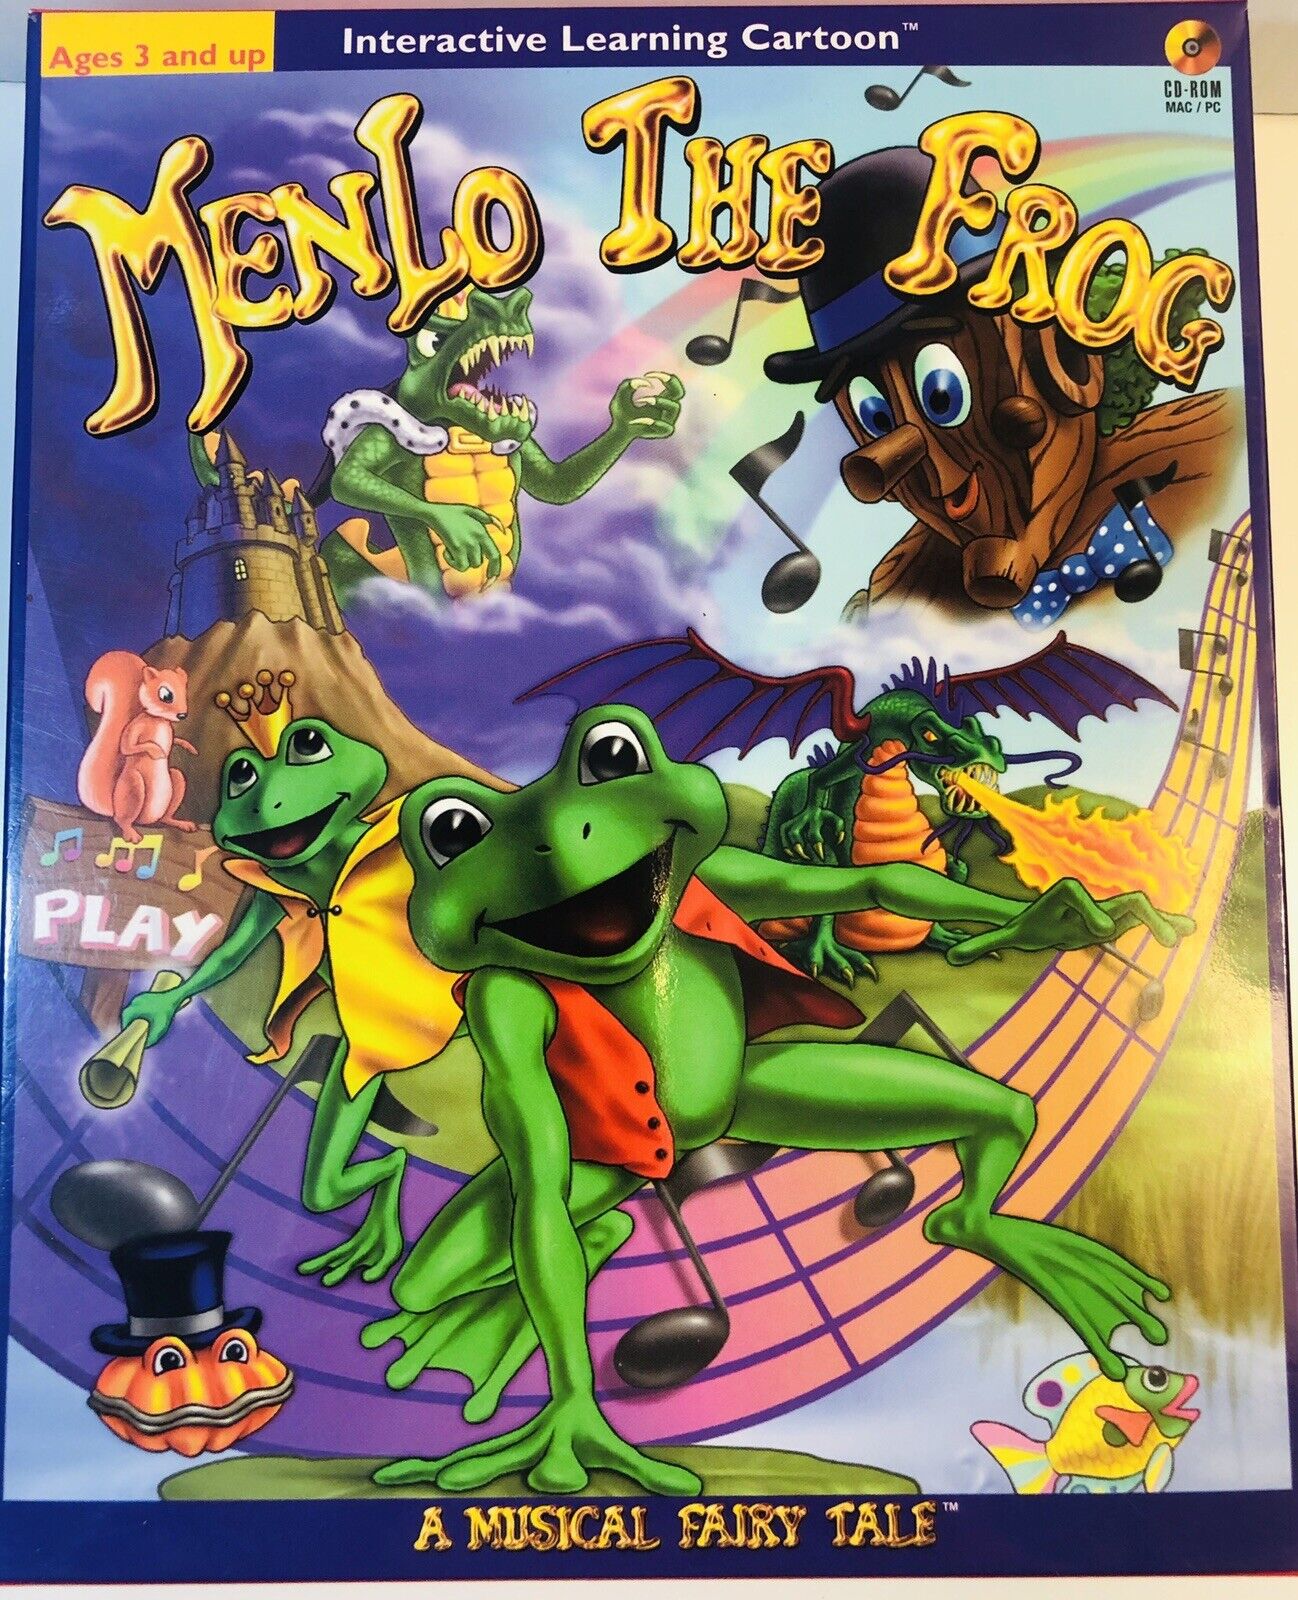 Menlo The Frog A Musical Fairy Tale Cd-Rom Mac/PC Interactive Learning Cartoon